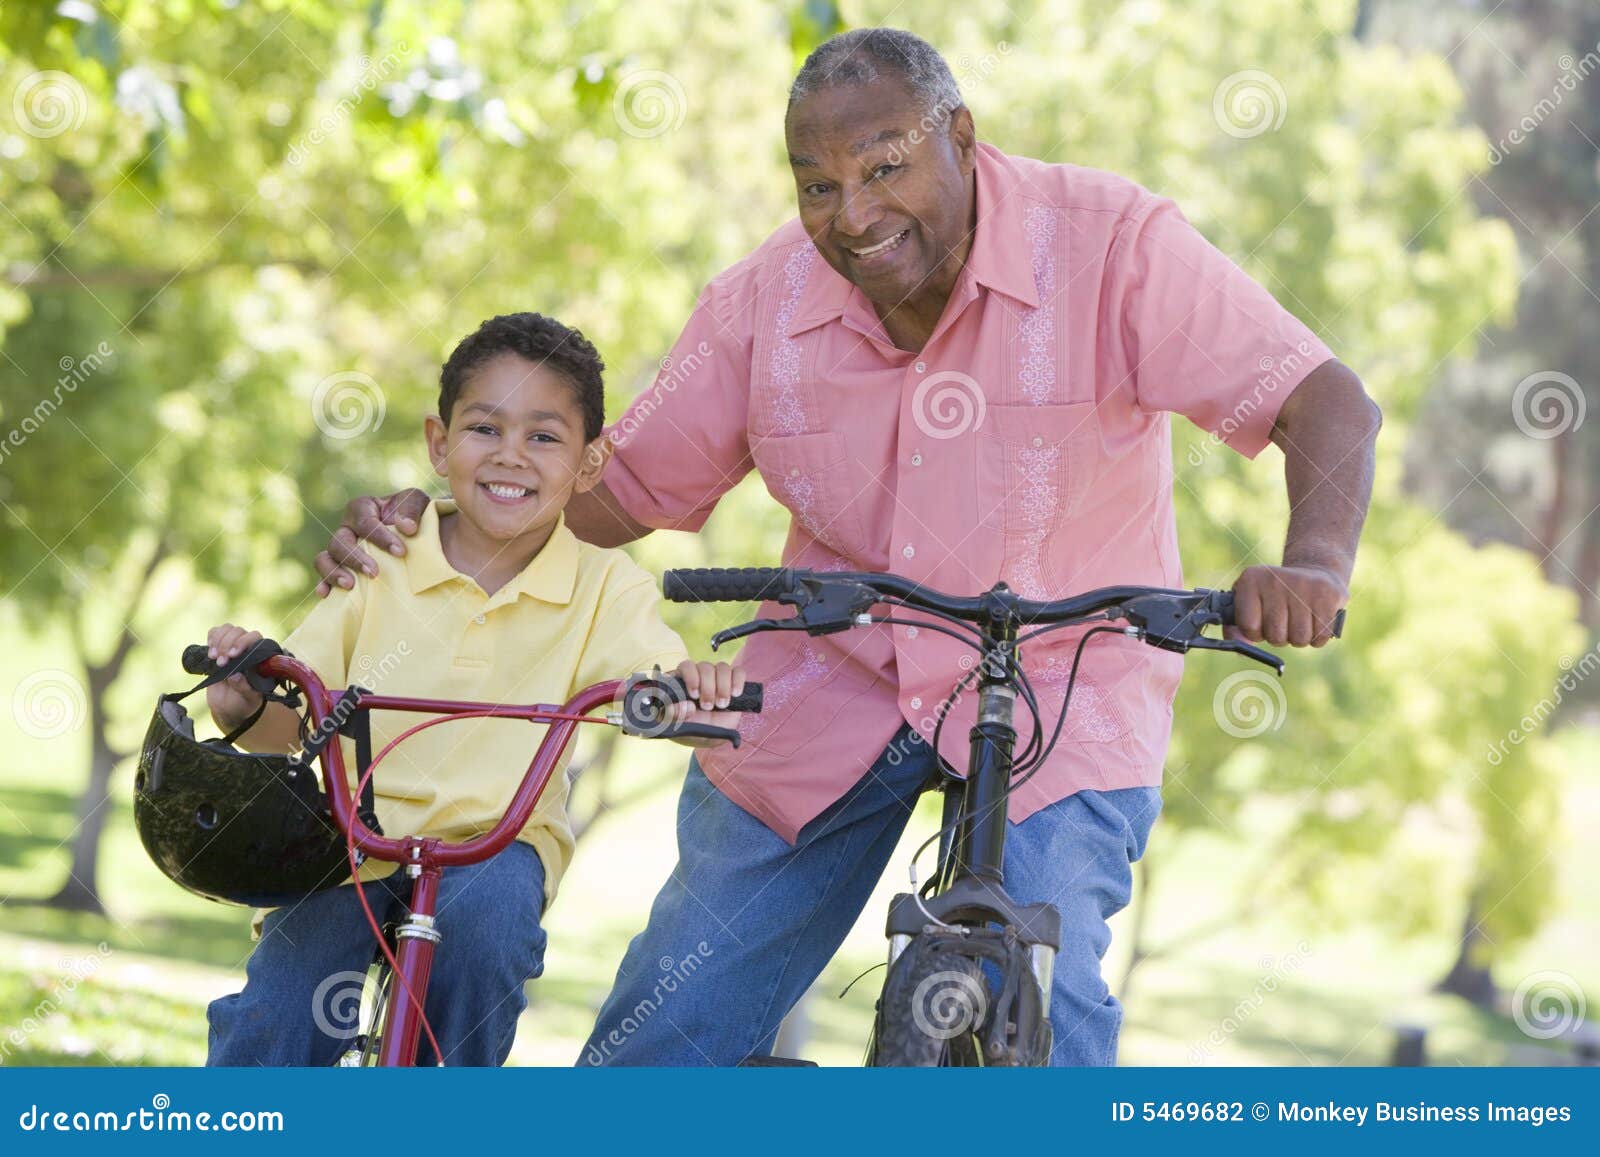 grandfather and grandson on bikes outdoors smiling